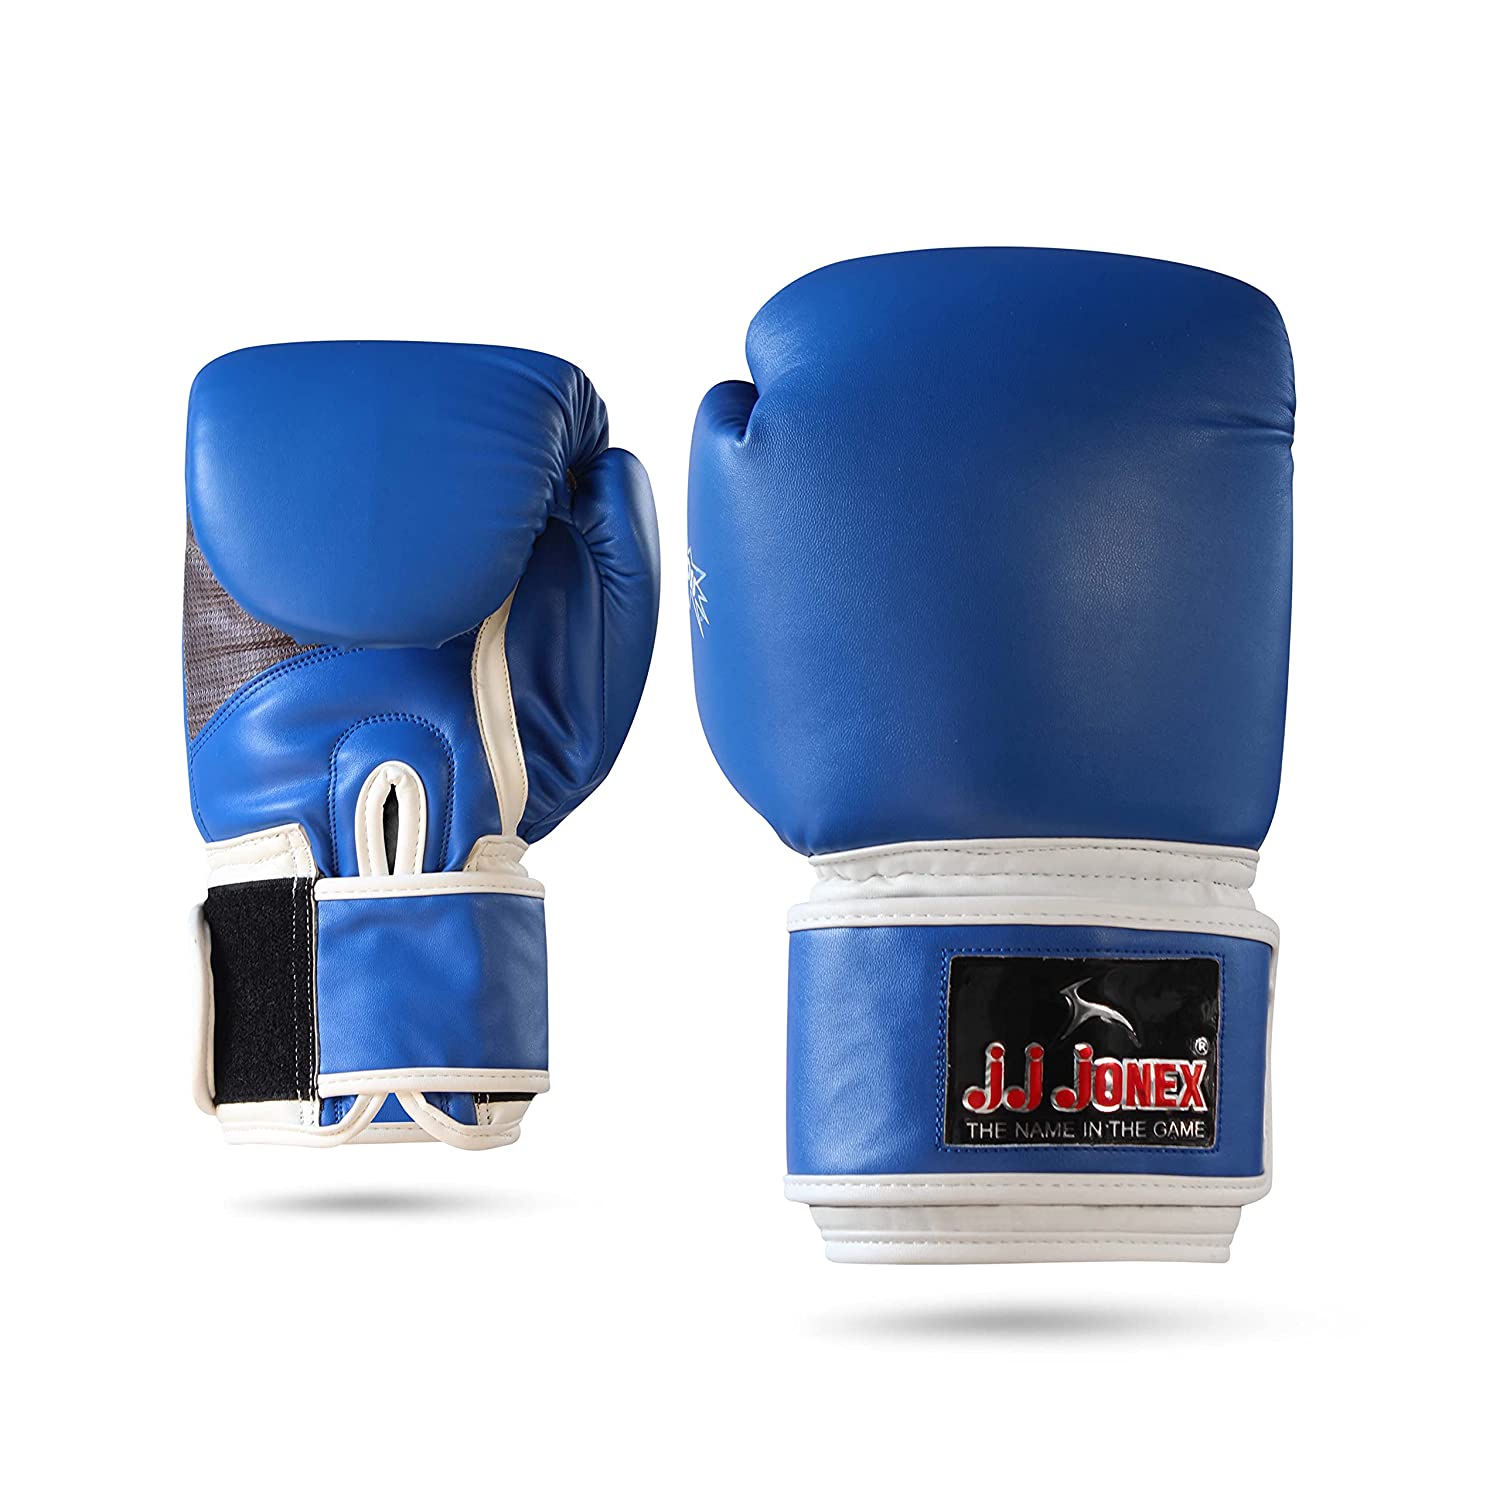 JJ Jonex Big Boss PU Punching Boxing Gloves for Adults and Experts (Blue) sppartos